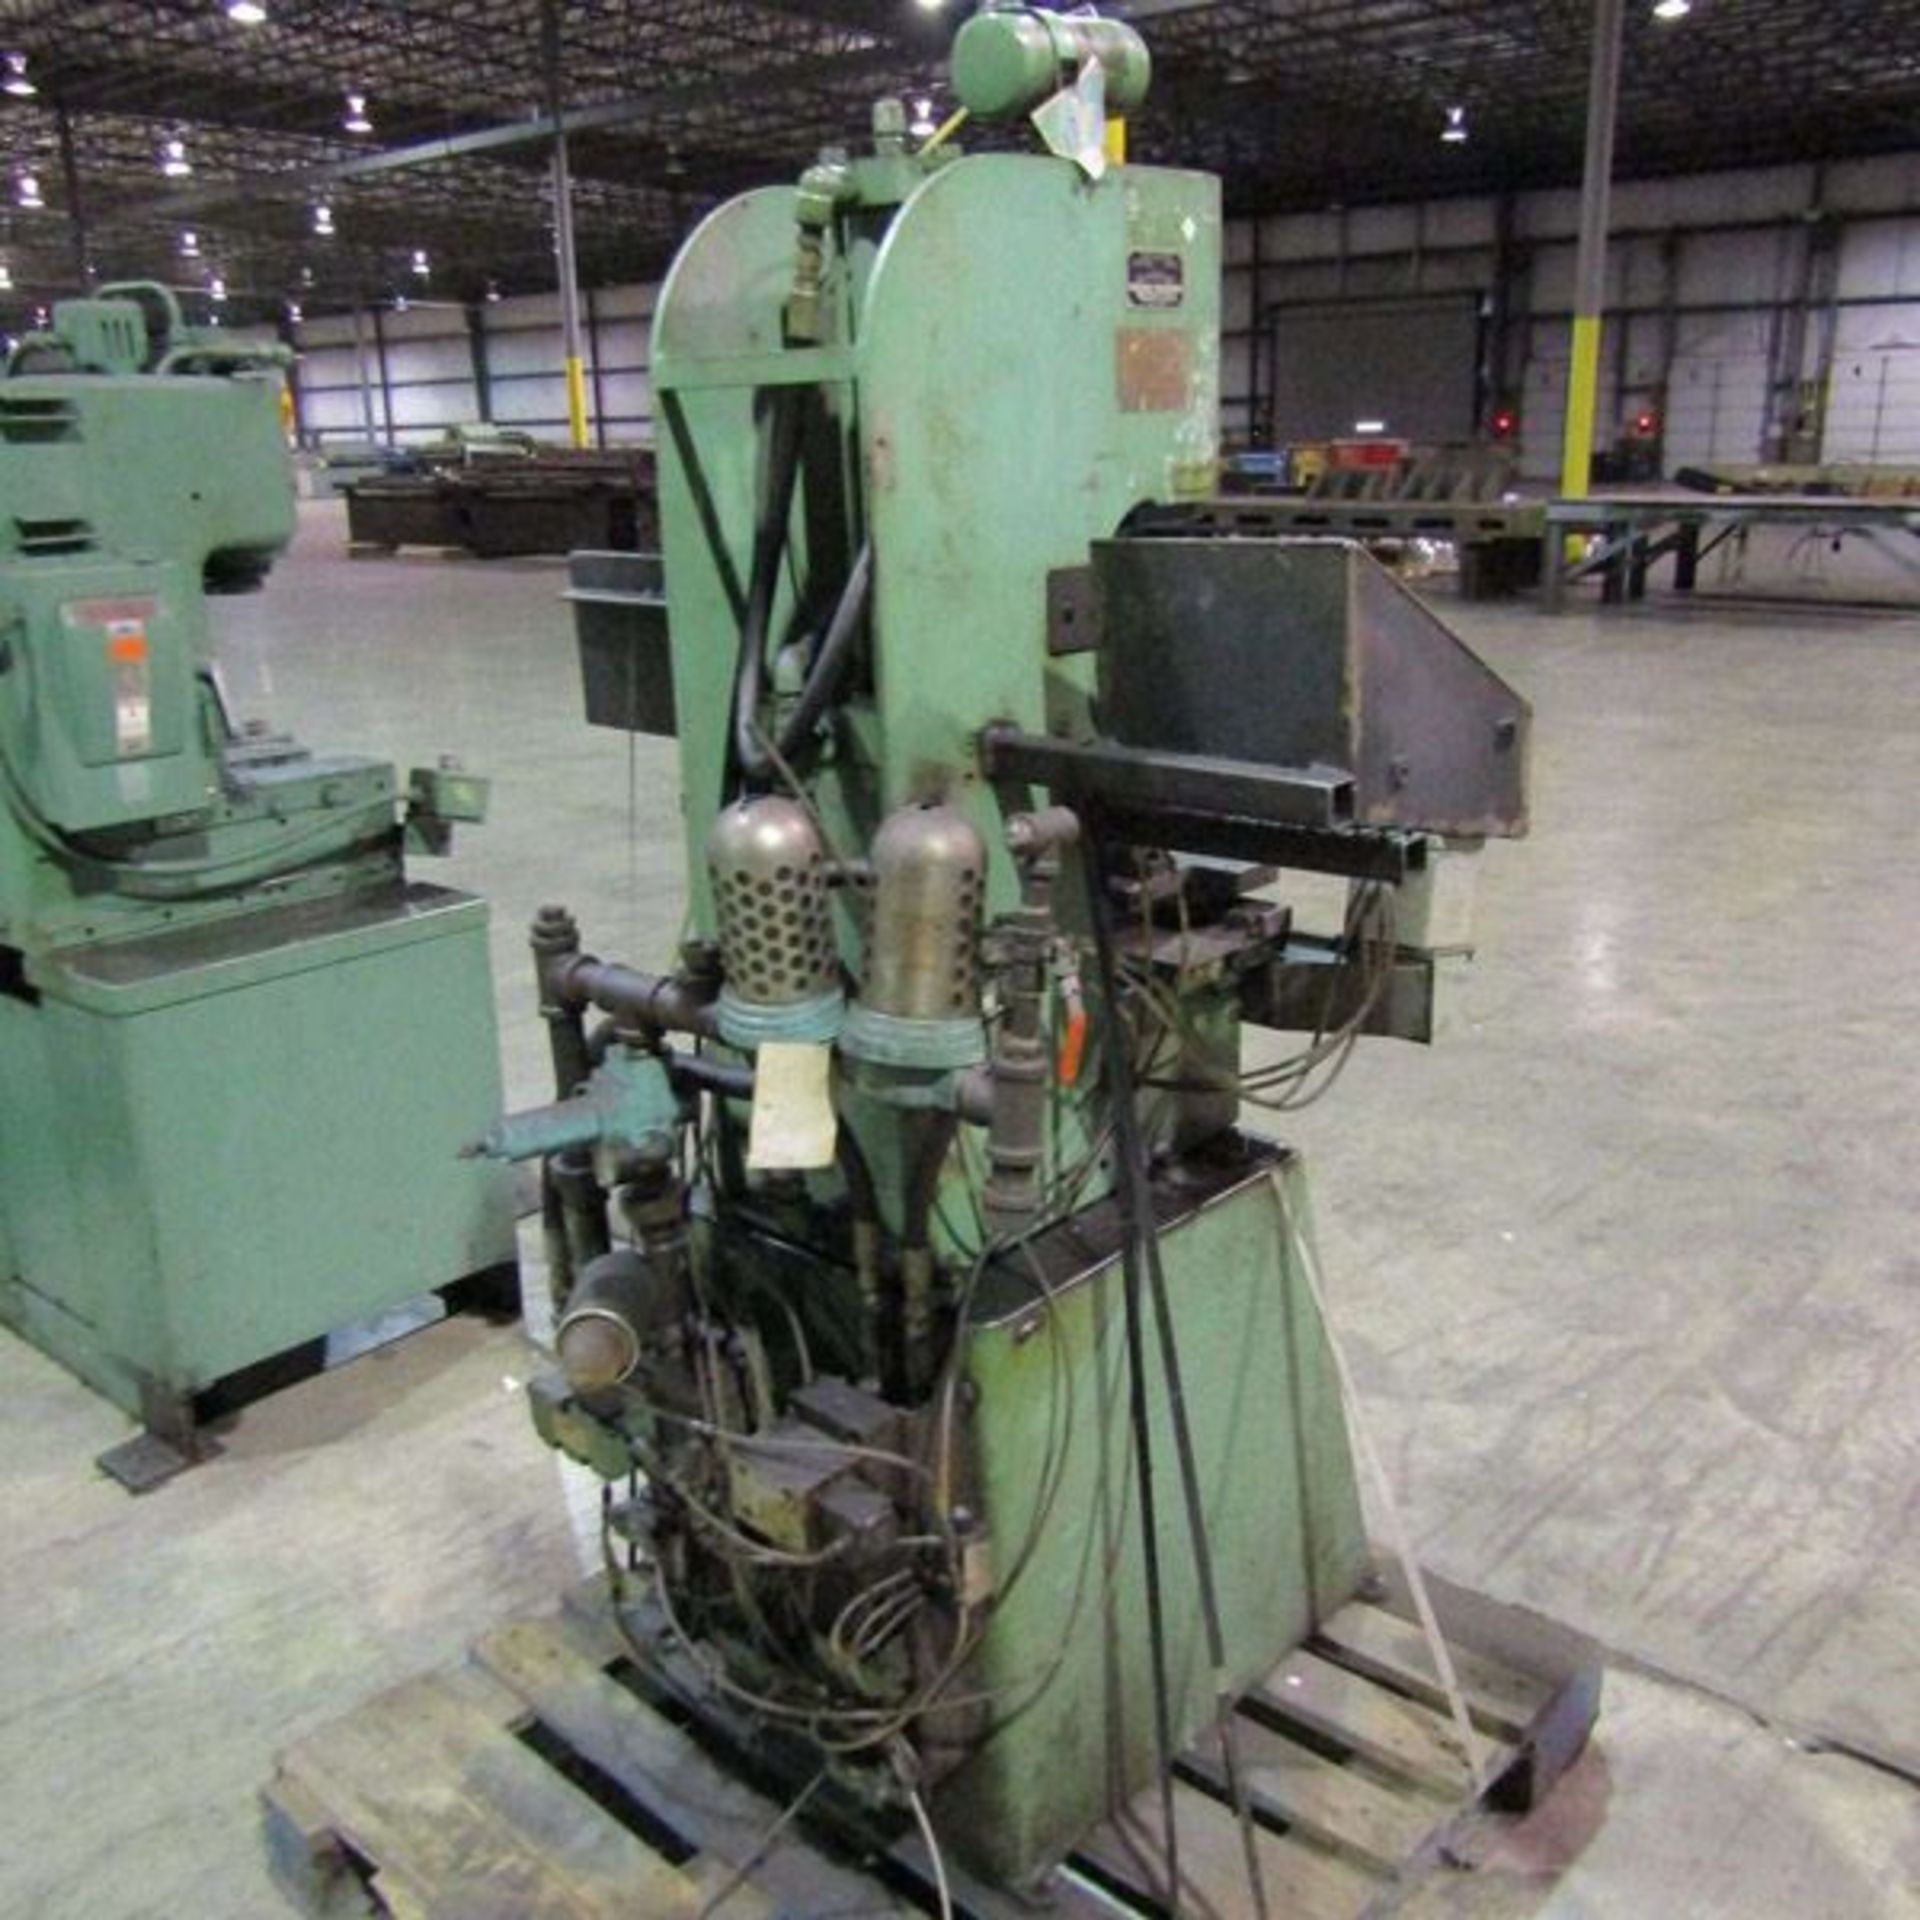 Air Hydraulics Air Over Oil C Frame Press 5.5 Ton x 14'' x 8''. LOADING FEE FOR THIS LOT: $200 - Image 6 of 7